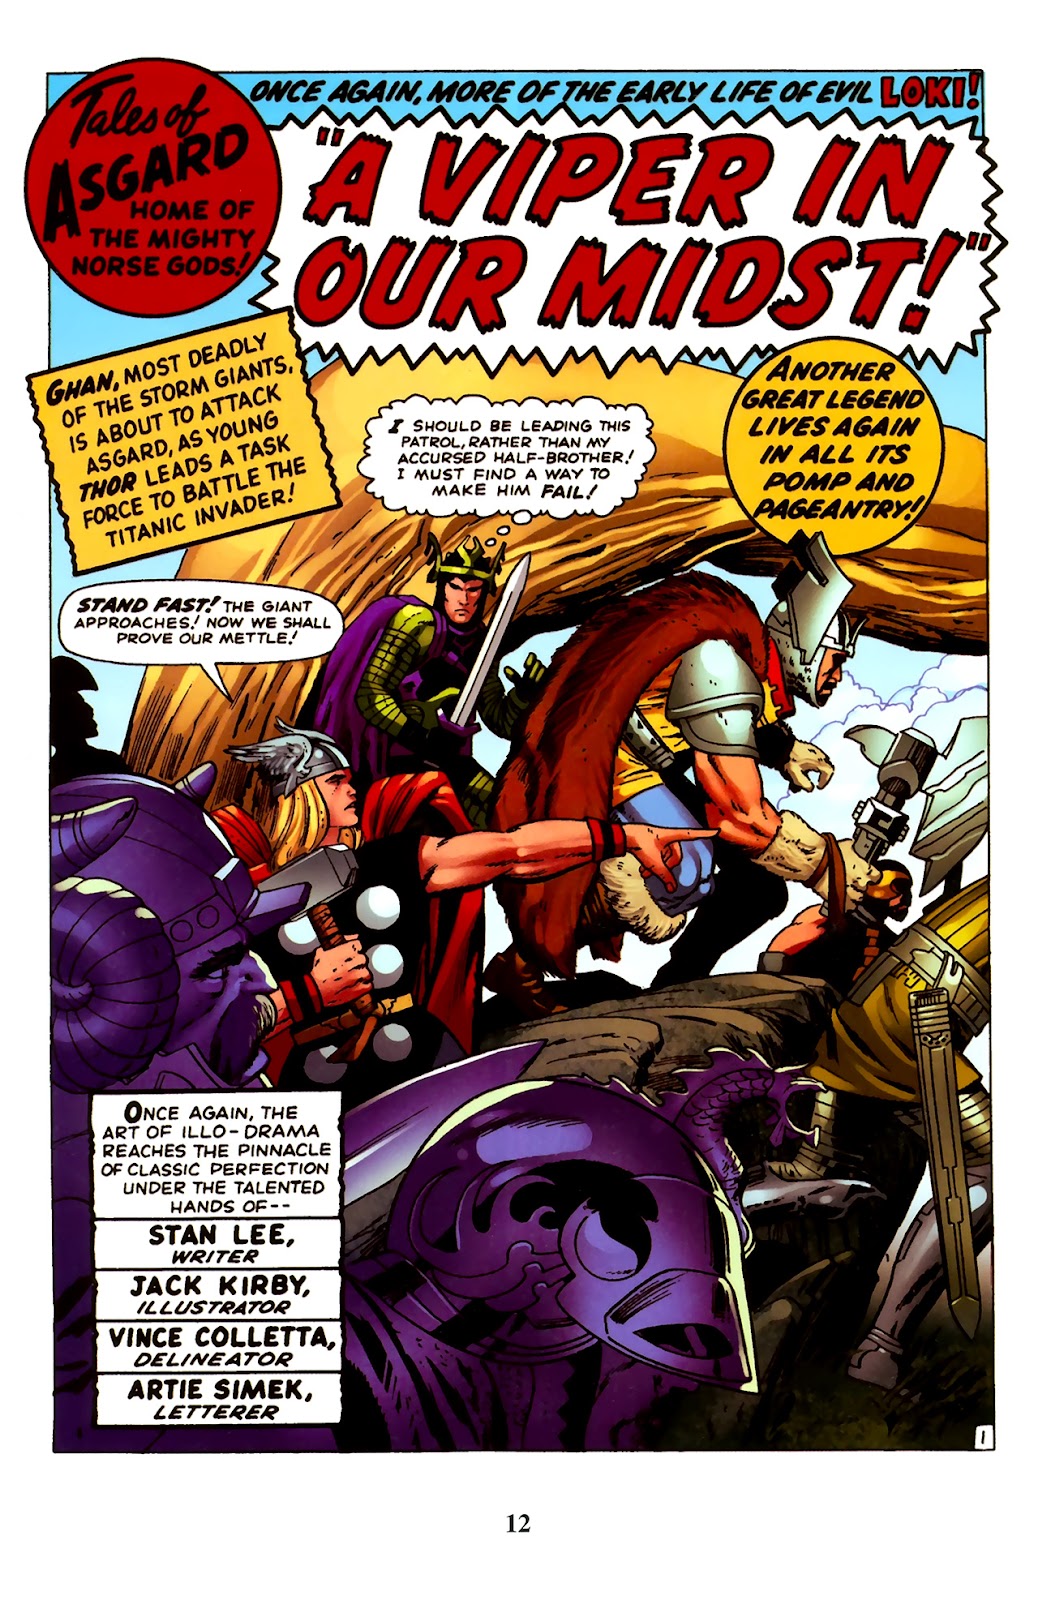 Thor: Tales of Asgard by Stan Lee & Jack Kirby issue 3 - Page 14